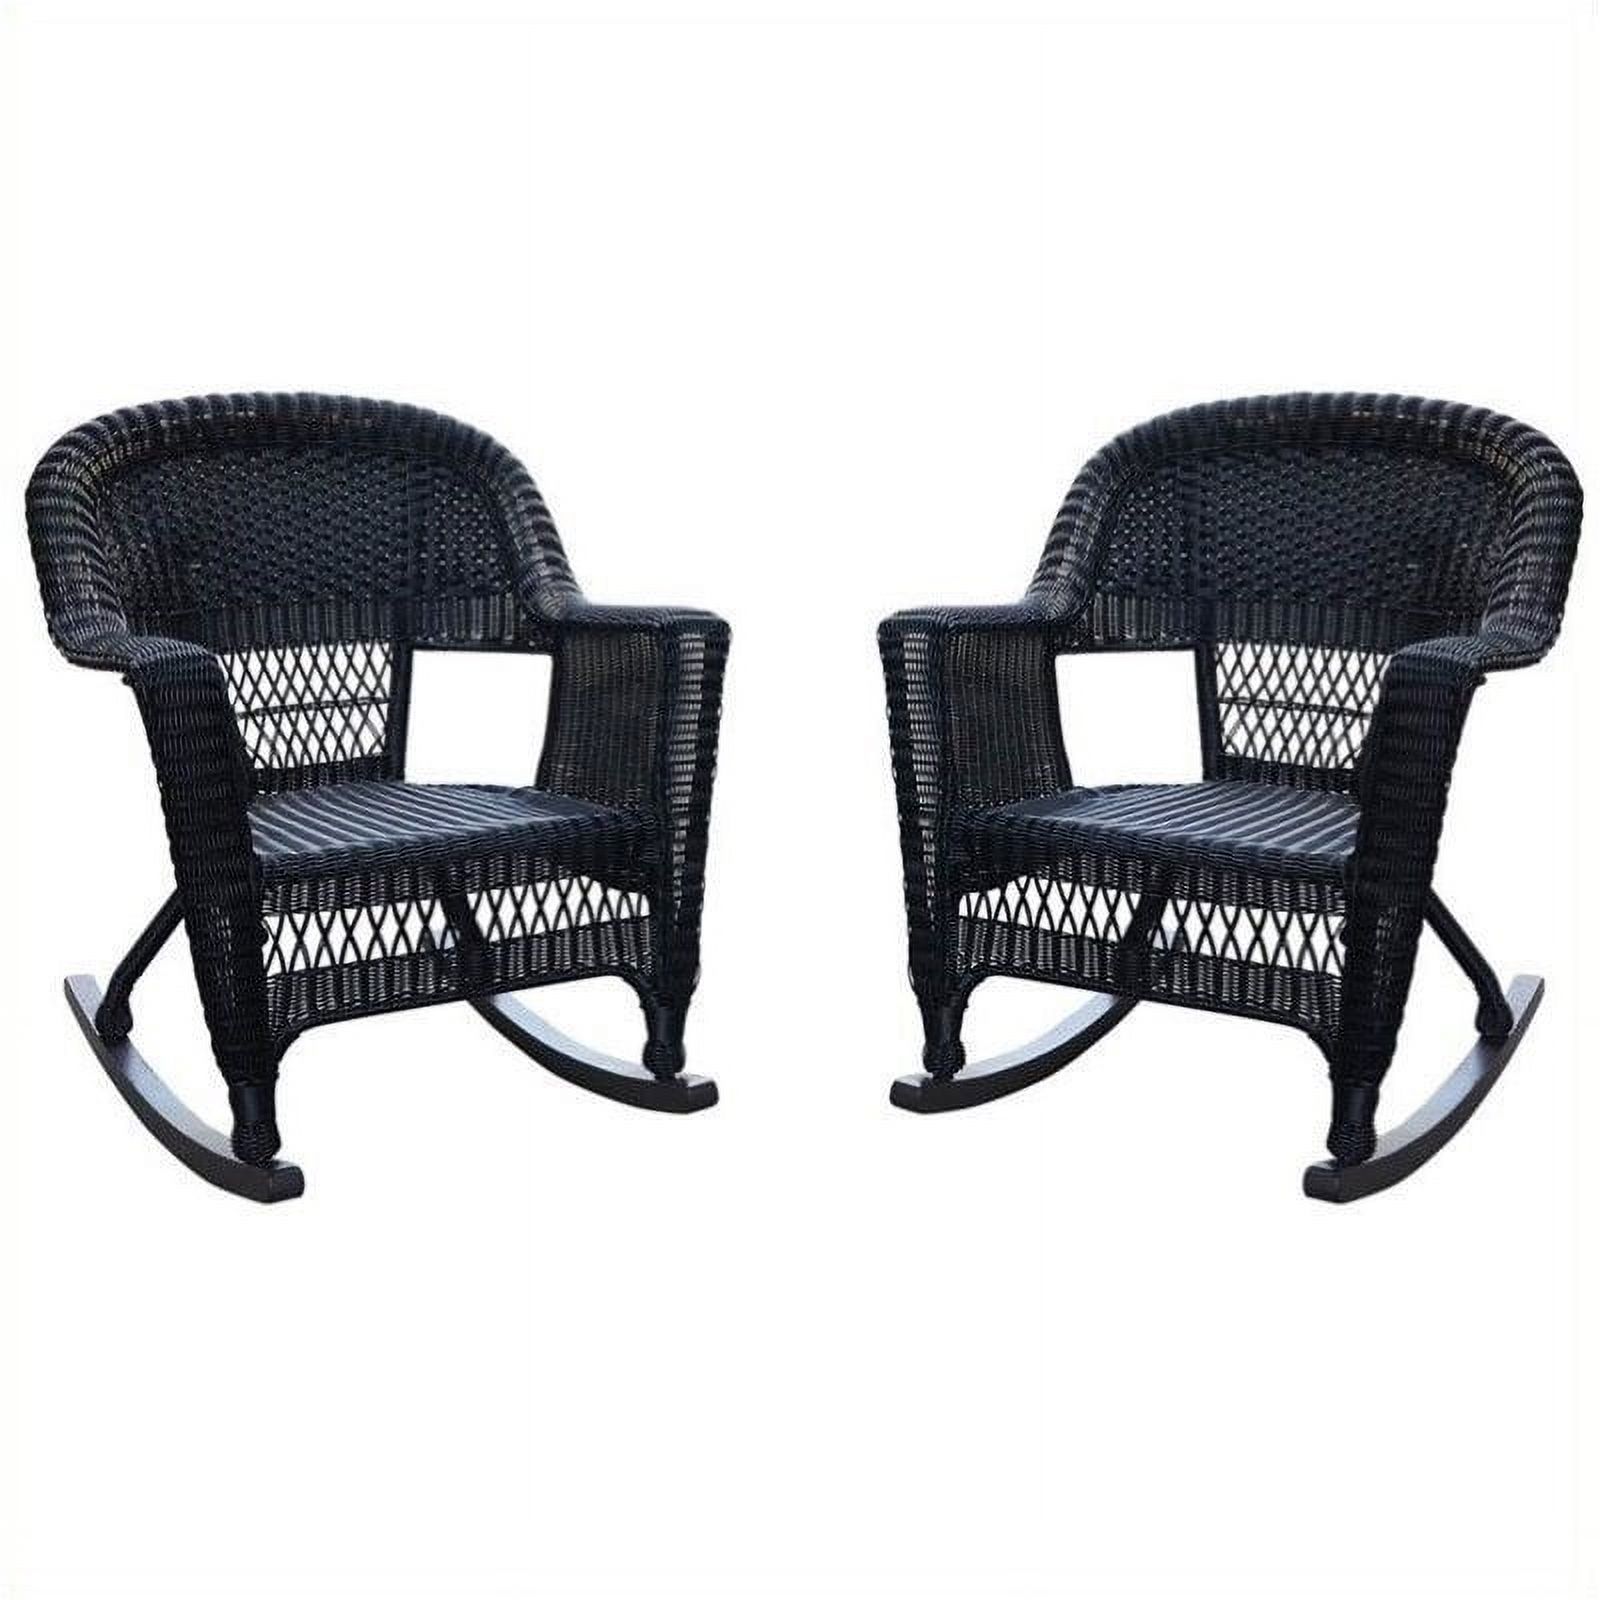 3 Piece Patio Furniture Set with (Set of 2) Patio Rocker and Water Fountain - image 3 of 5